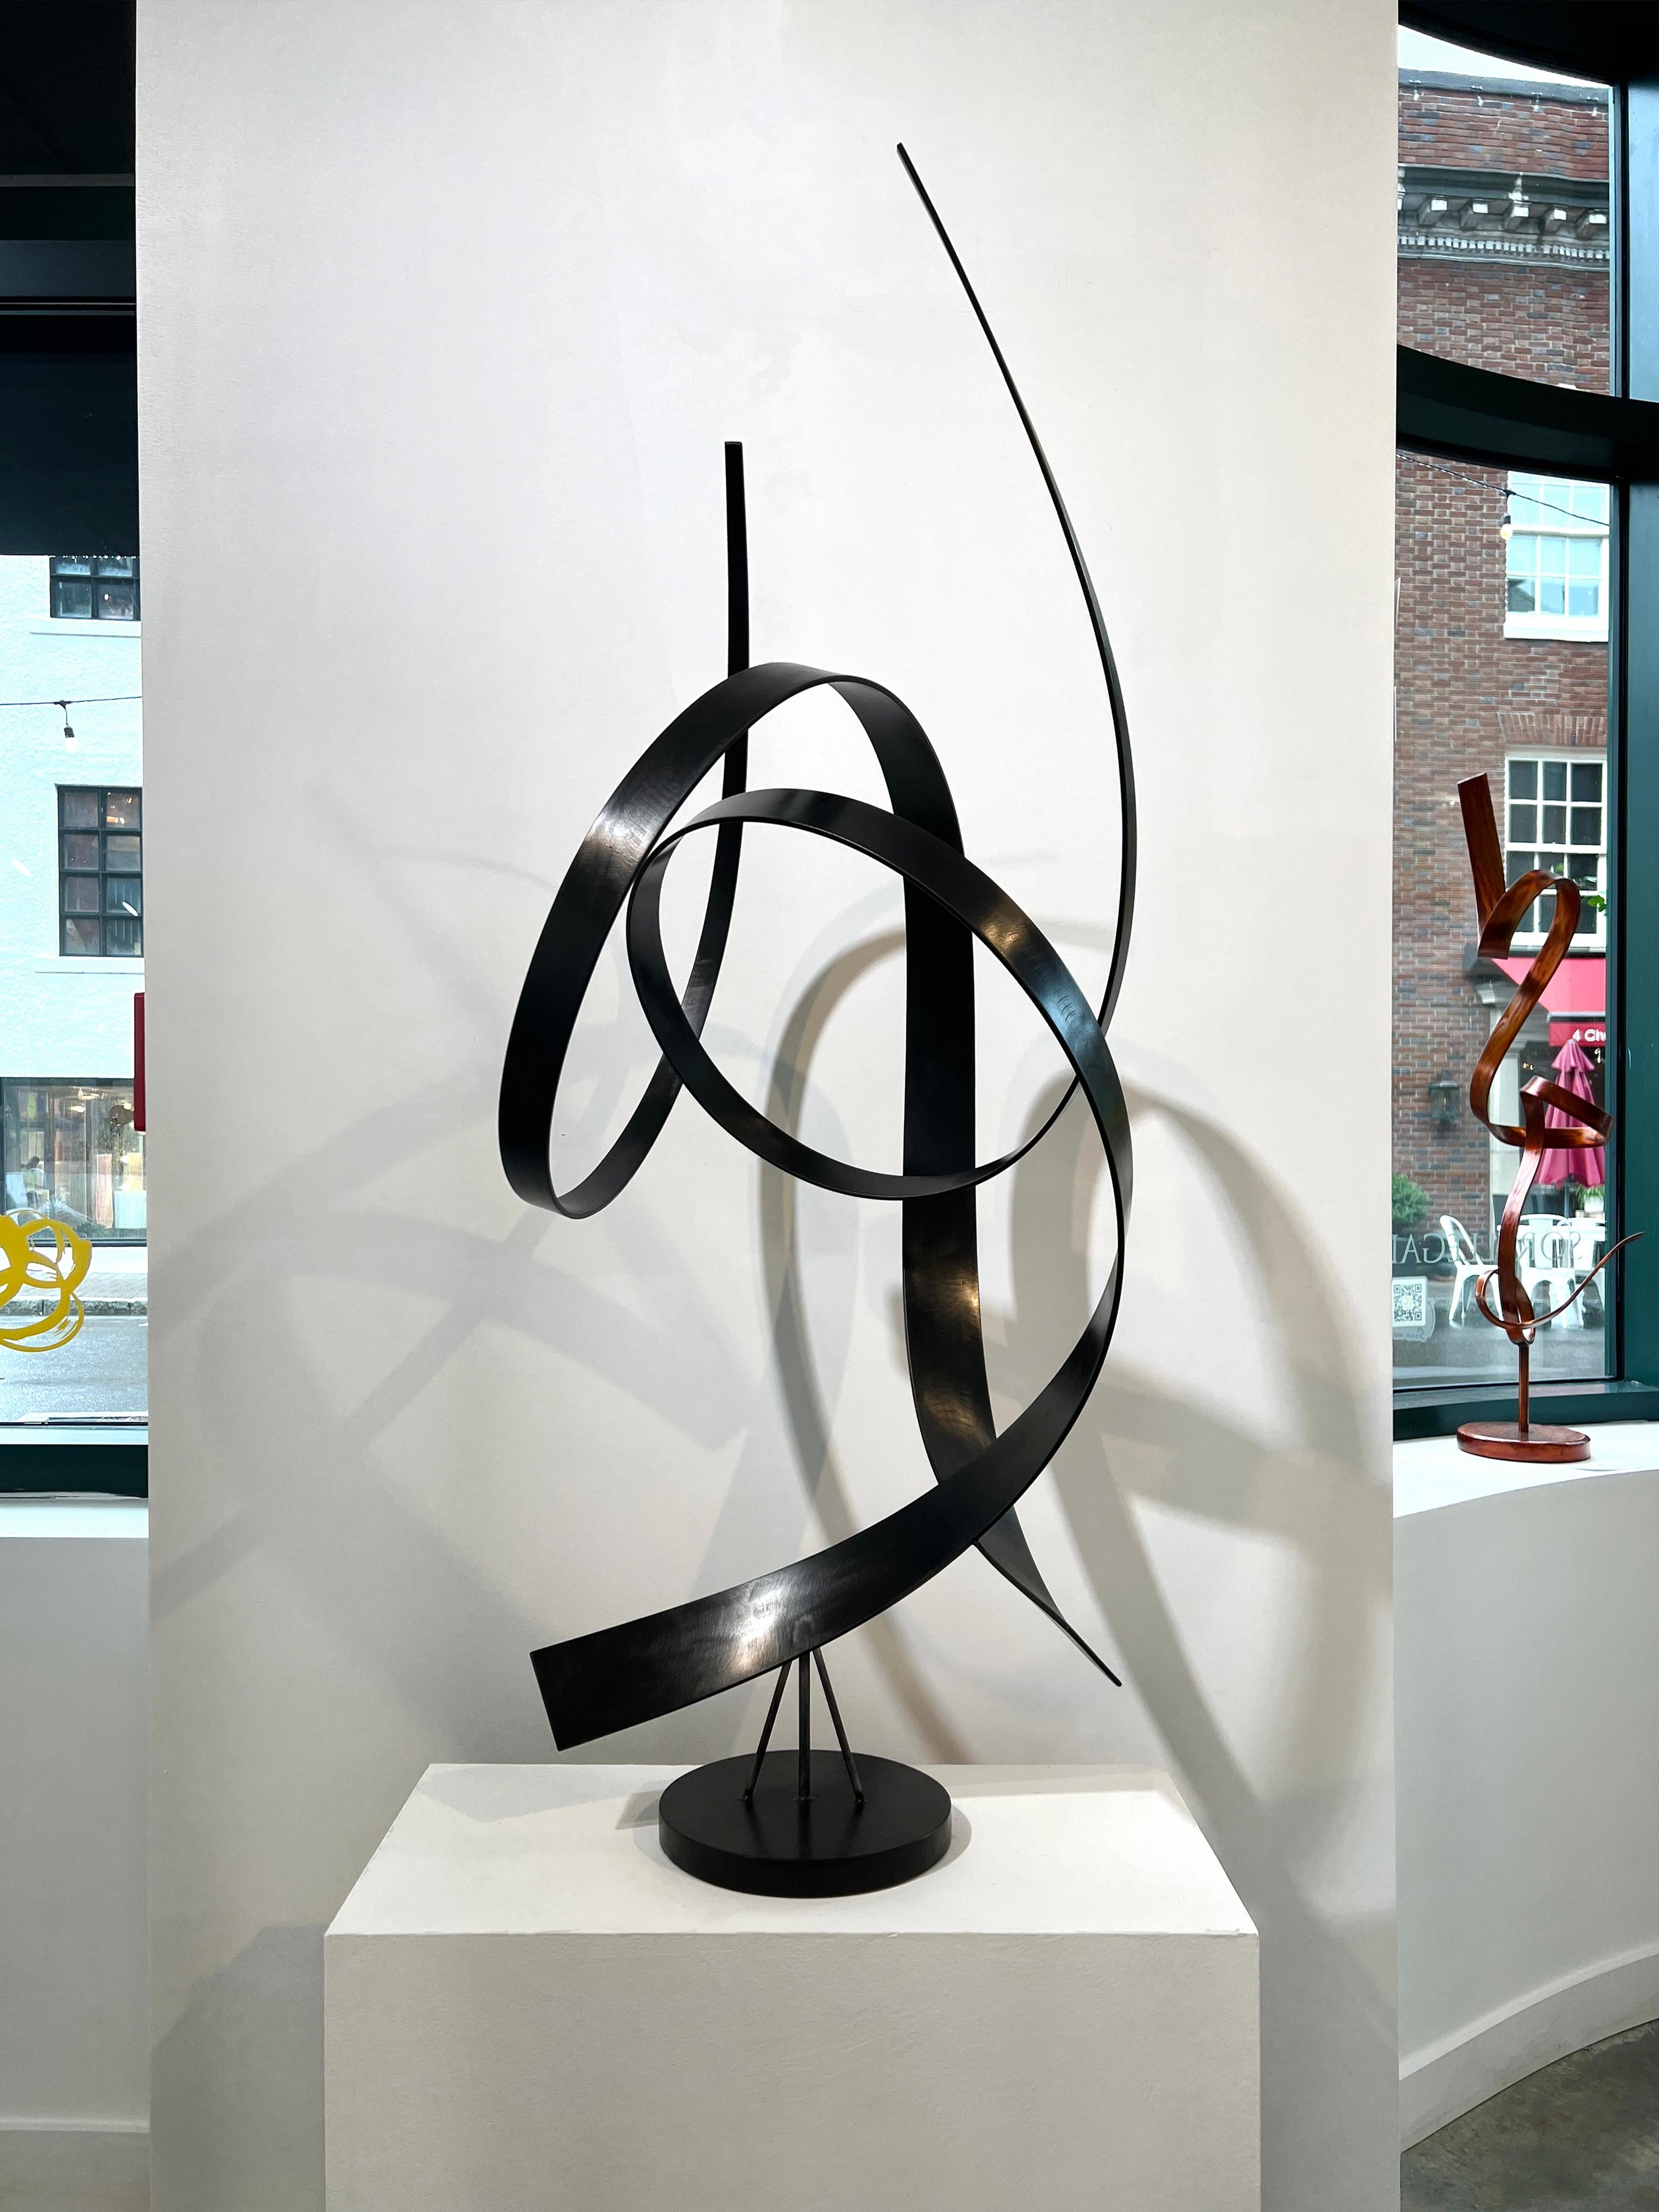 This large, abstract sculpture by Joe Sorge is made with steel and black dye. Two strips of steel curl upward from a round, circular base, twisting through and around one another. The sculpture casts unique and intricate shadows on its surrounding